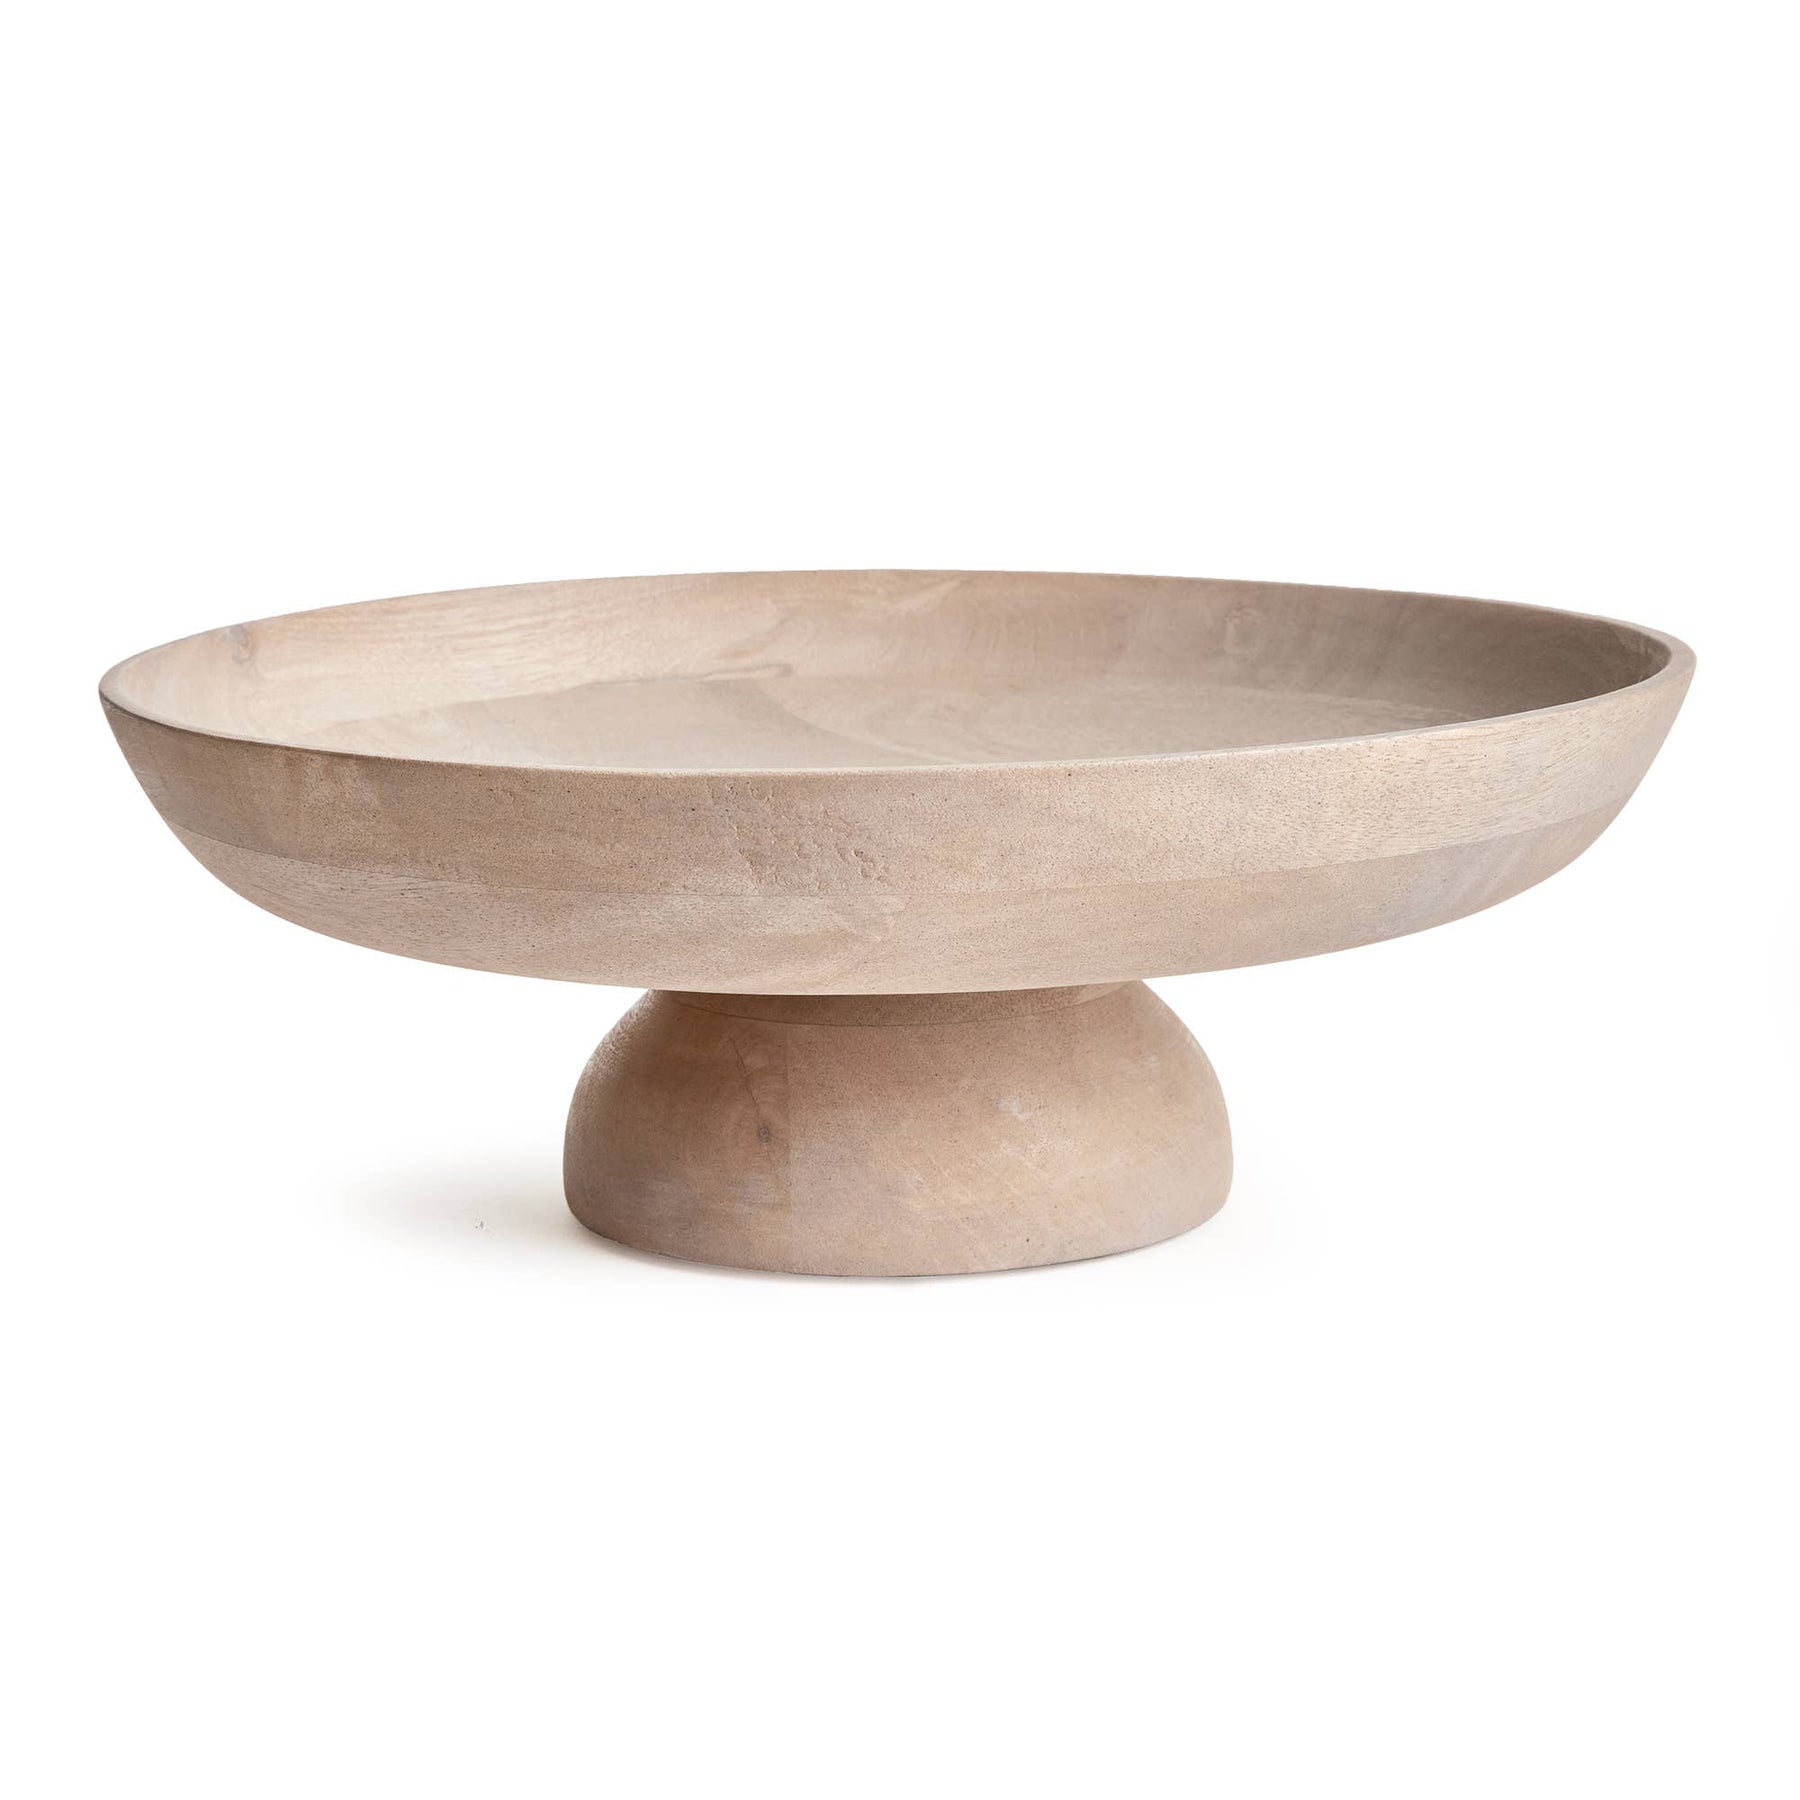 Bowie Footed Bowl, Graywash